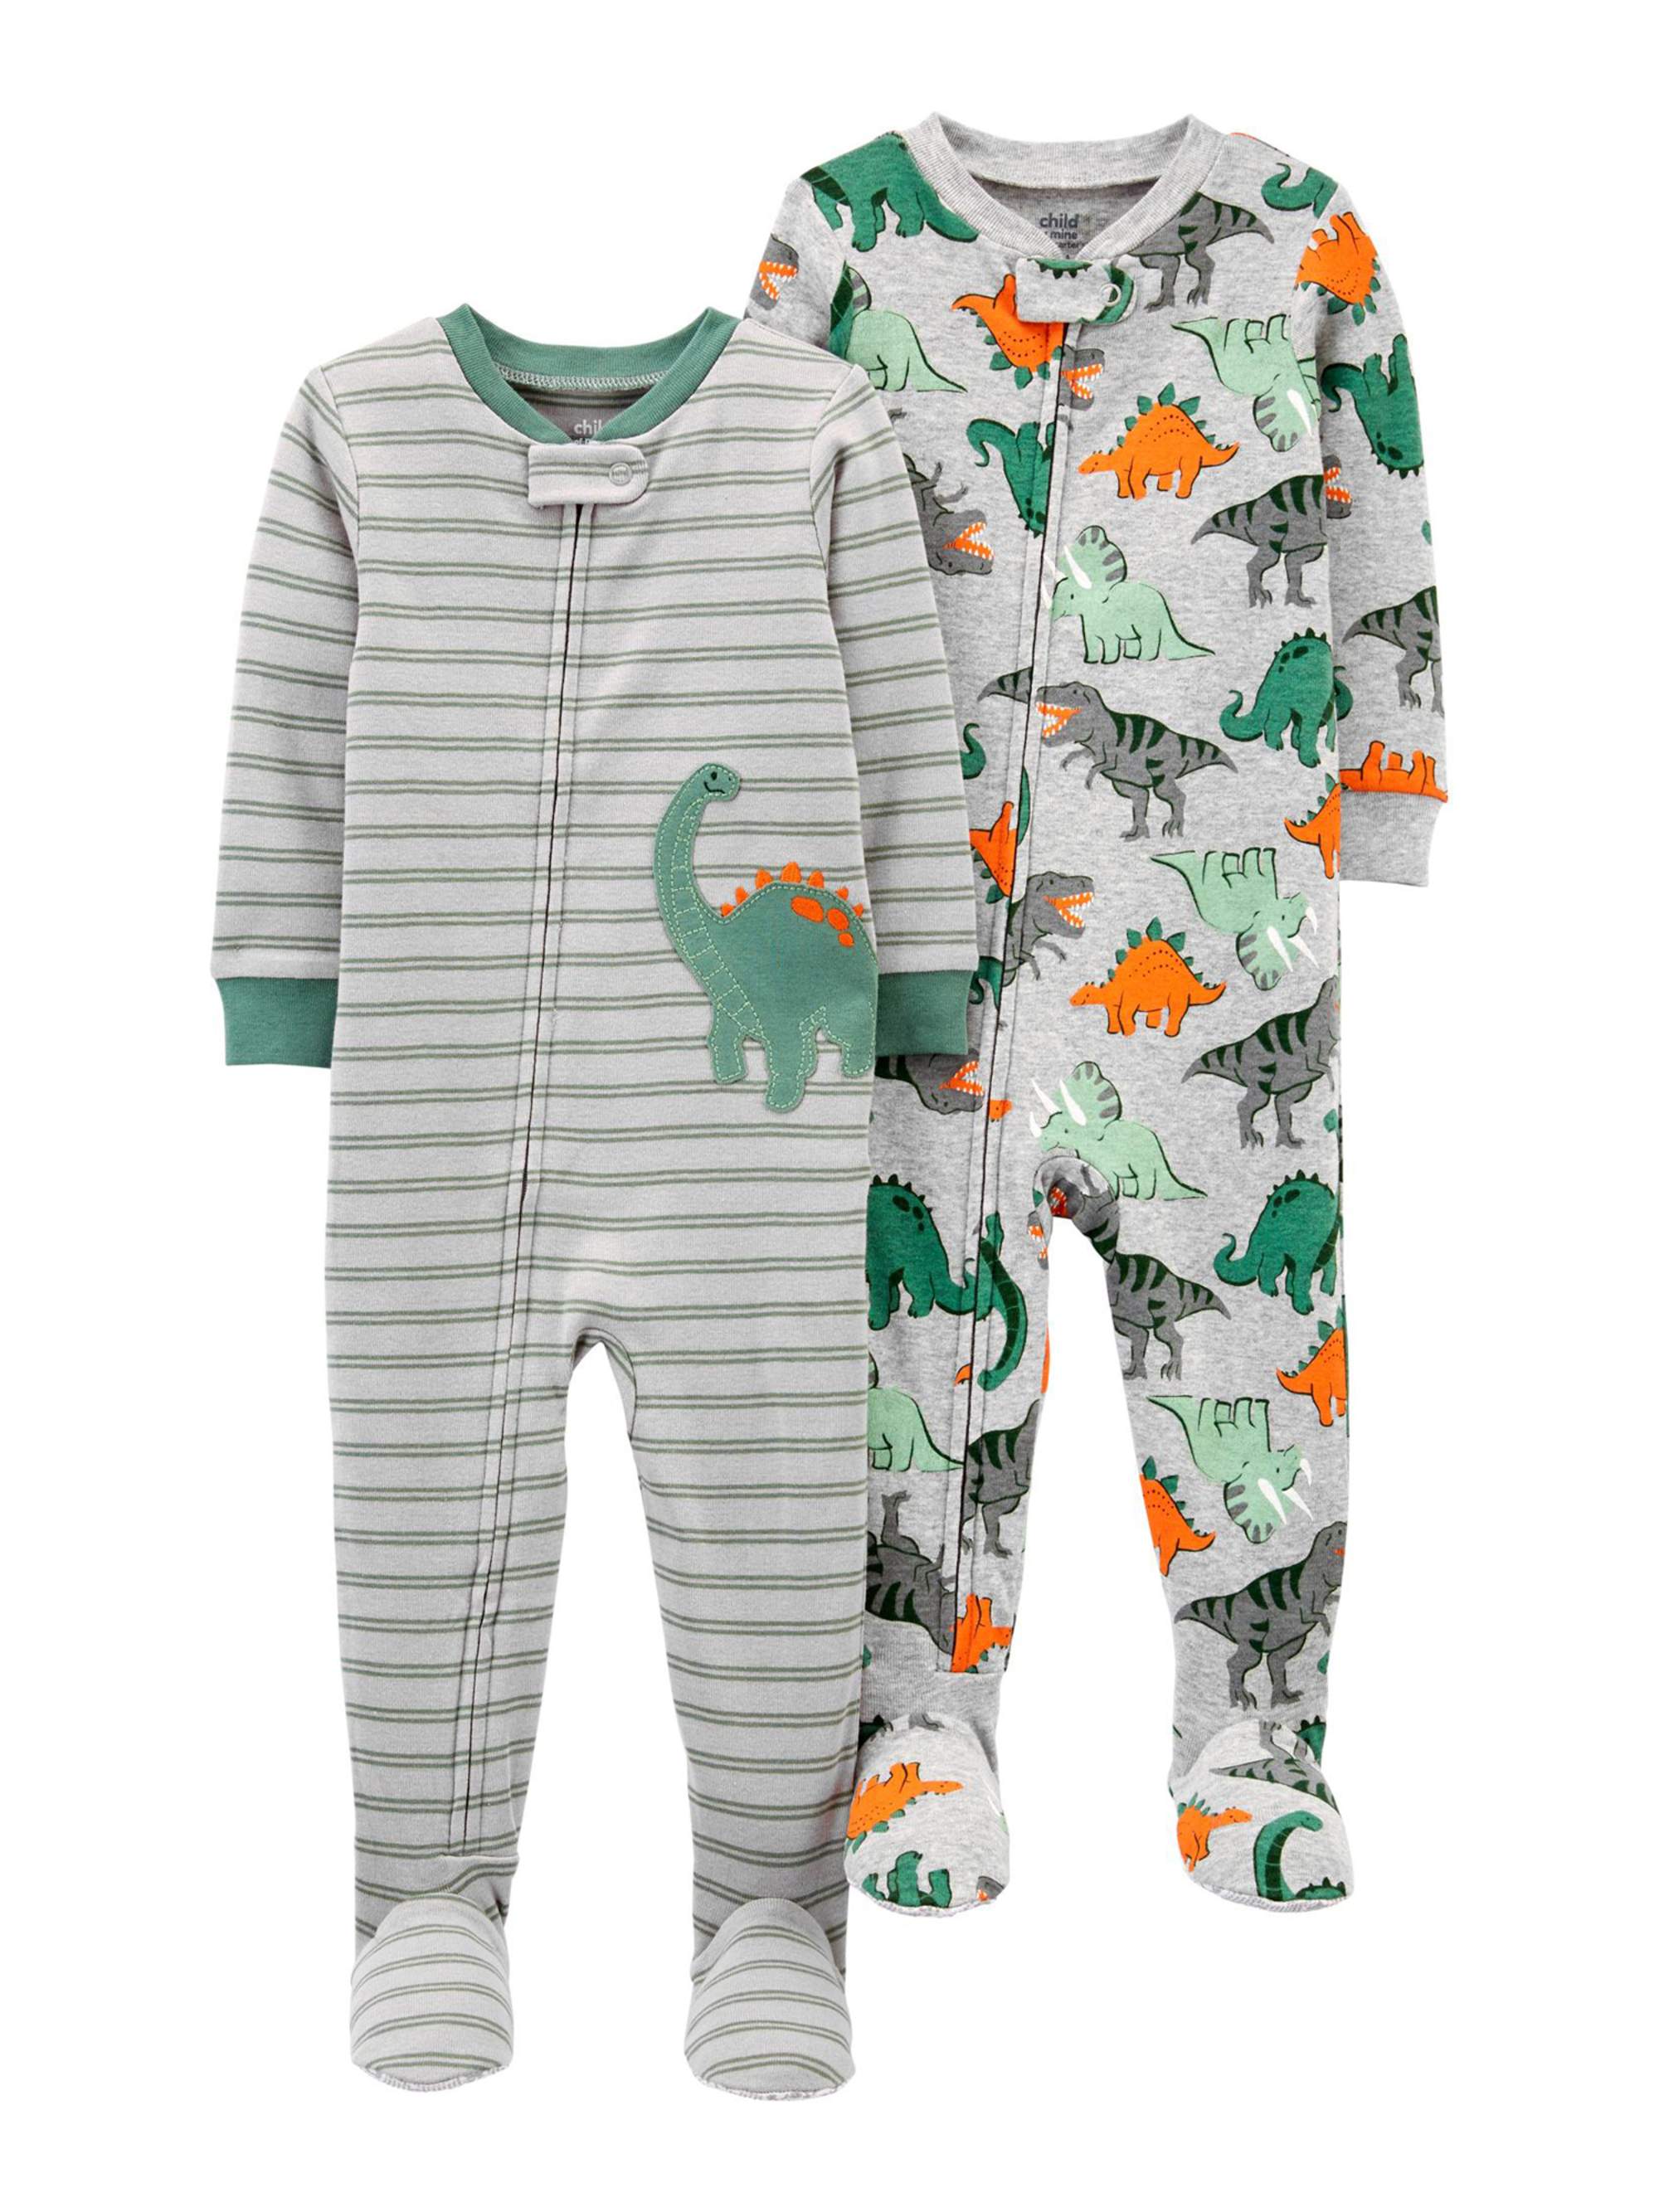 Carter's Child of Mine Baby and Toddler Boy Pajamas, One-Piece, 2-Pack, Sizes 6M-5T - image 1 of 2